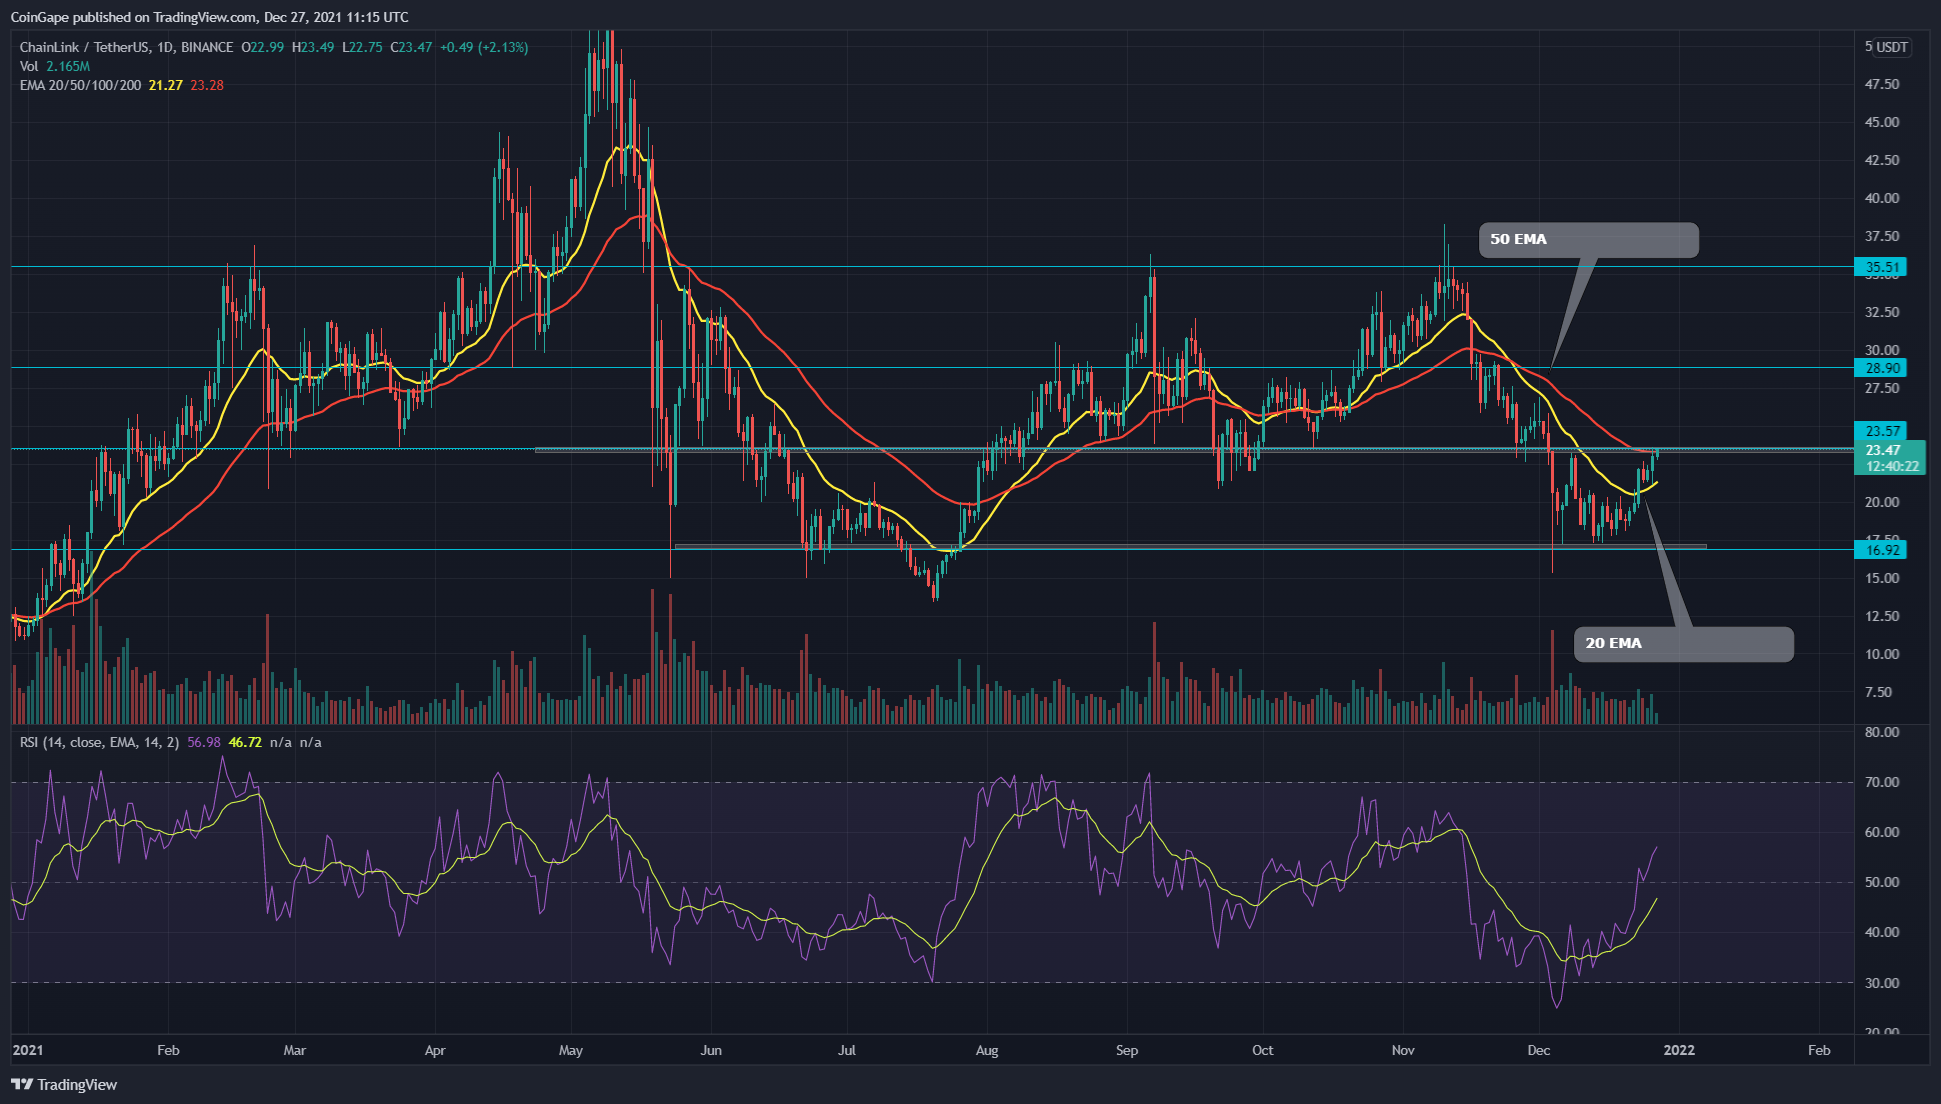 Chainlink Price Analysis: LINK Token challenges $23.5 resistance for bullish breakout